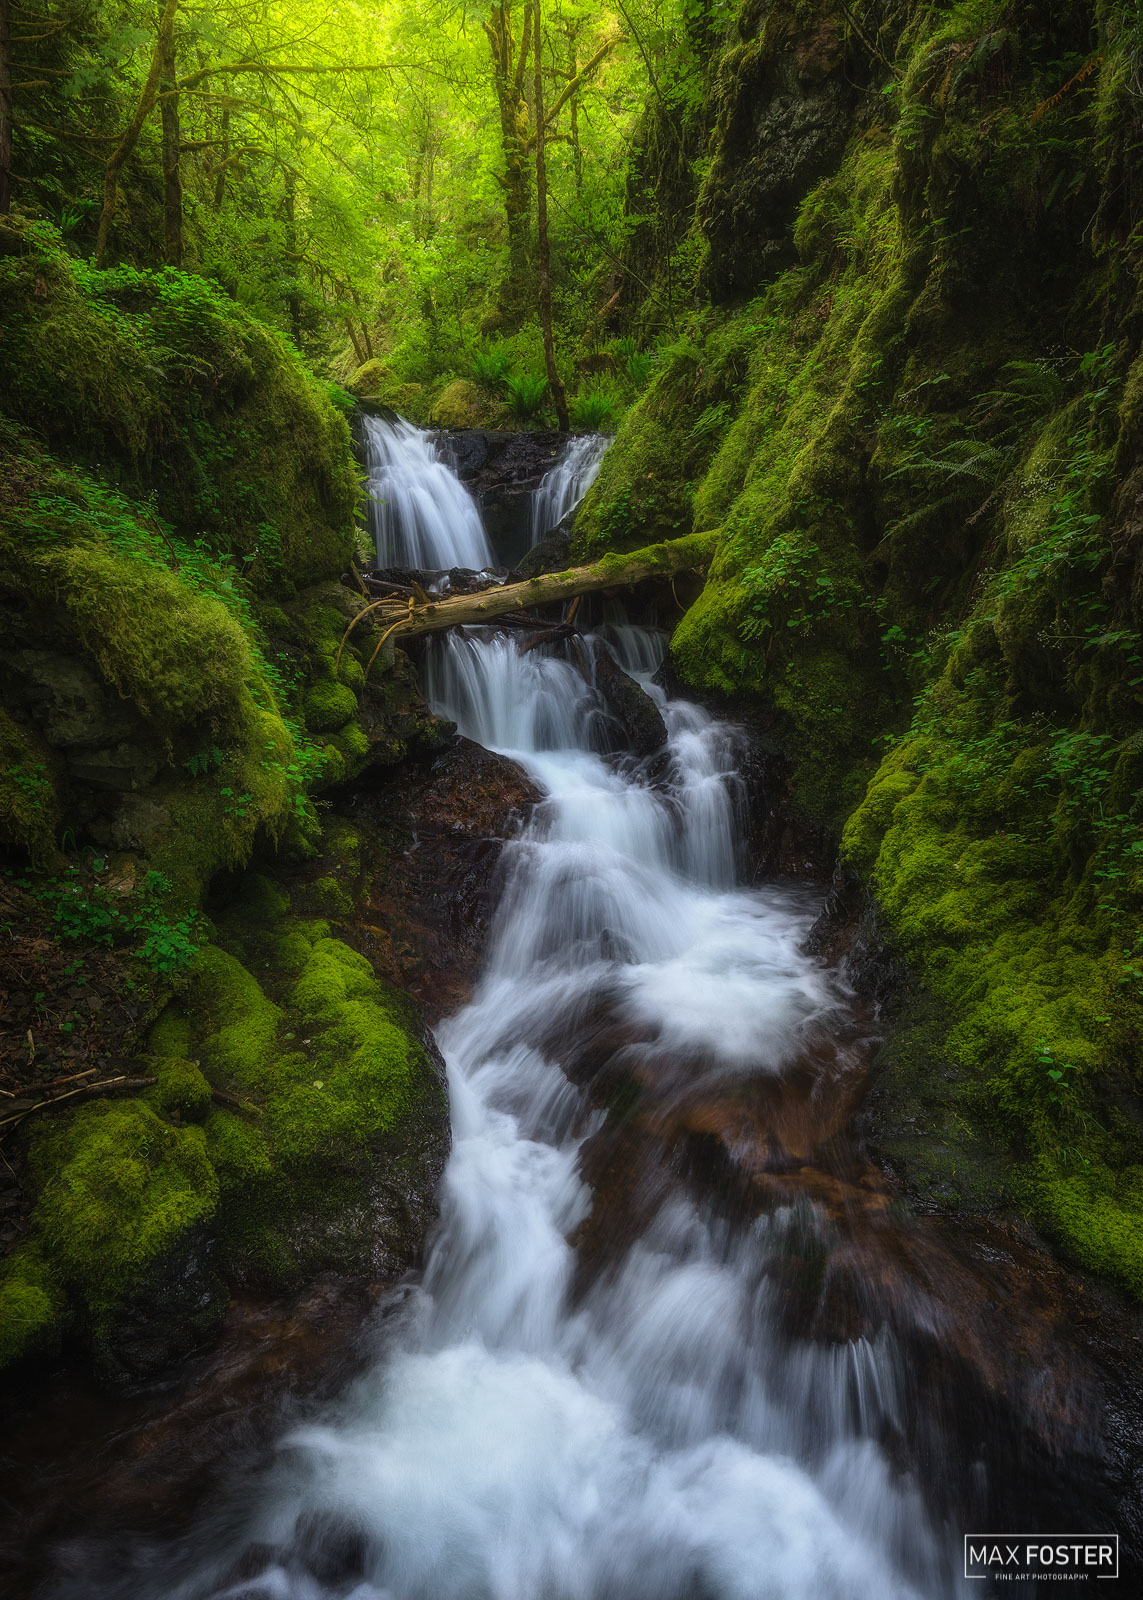 Bring nature into your home with Gorton Scramble, Max Foster's limited edition photography print of Gorton Creek Falls in Oregon...